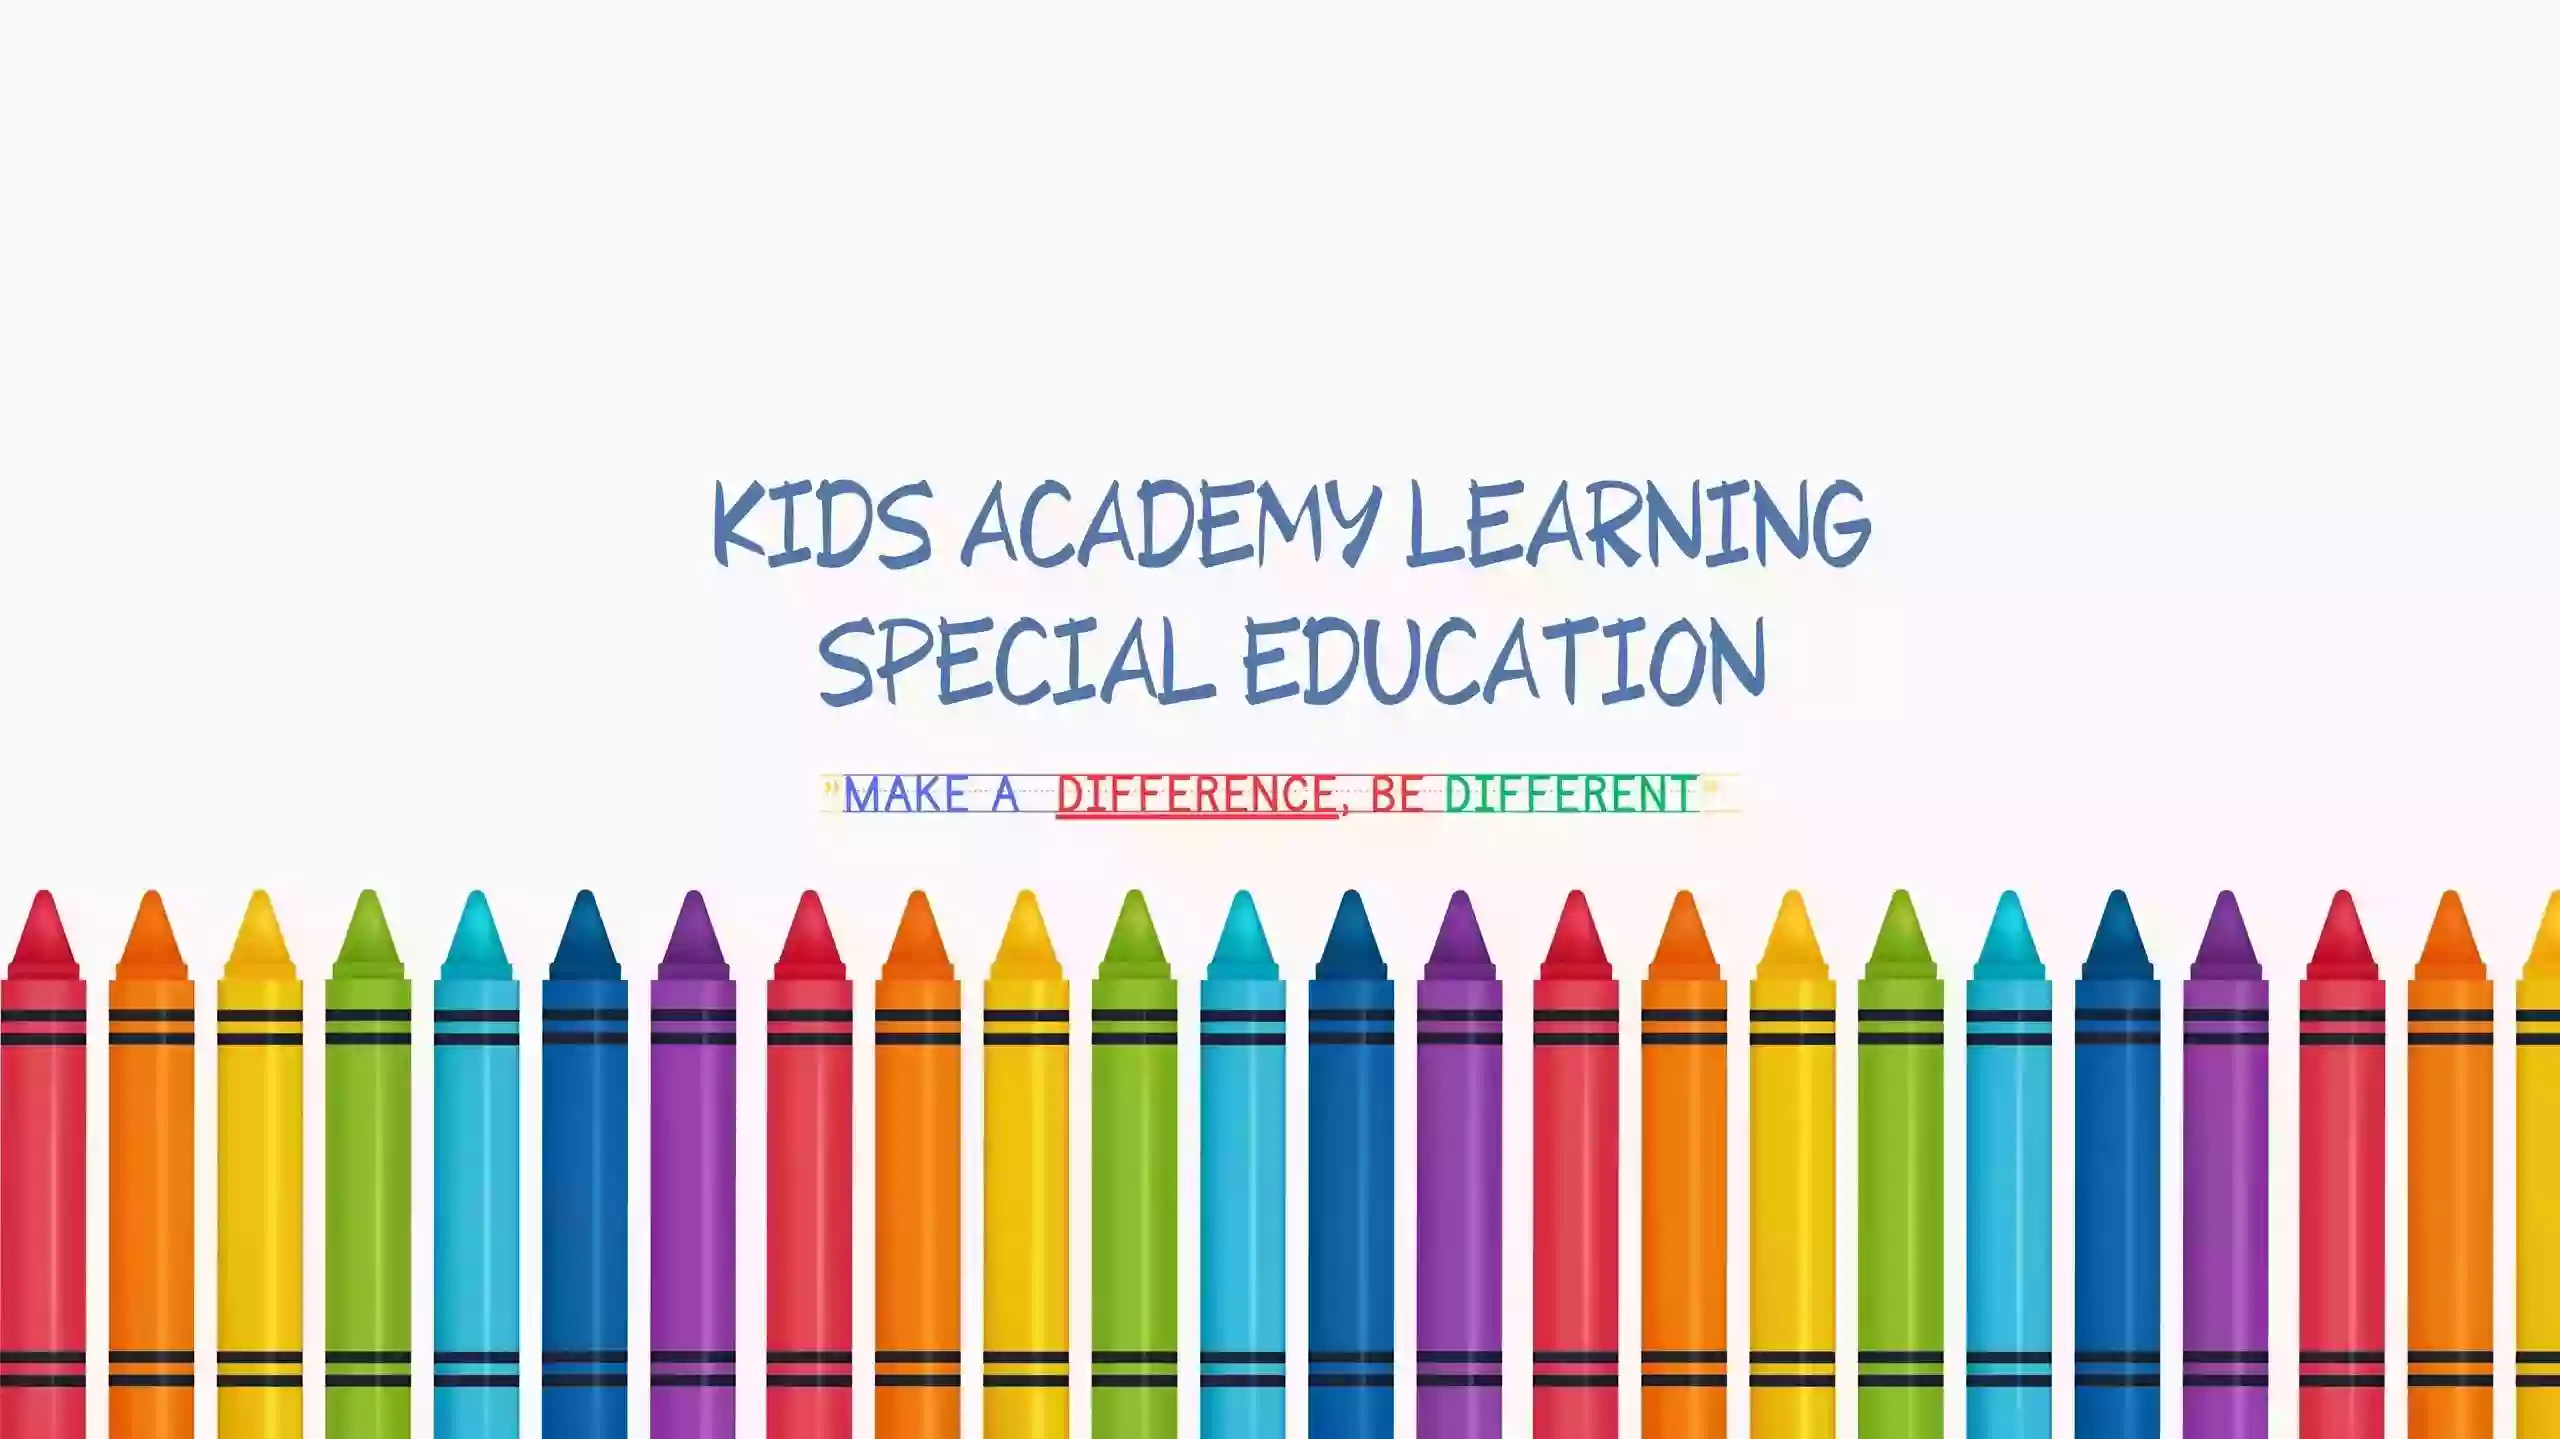 KIDS ACADEMY LEARNING SPECIAL EDUCATION